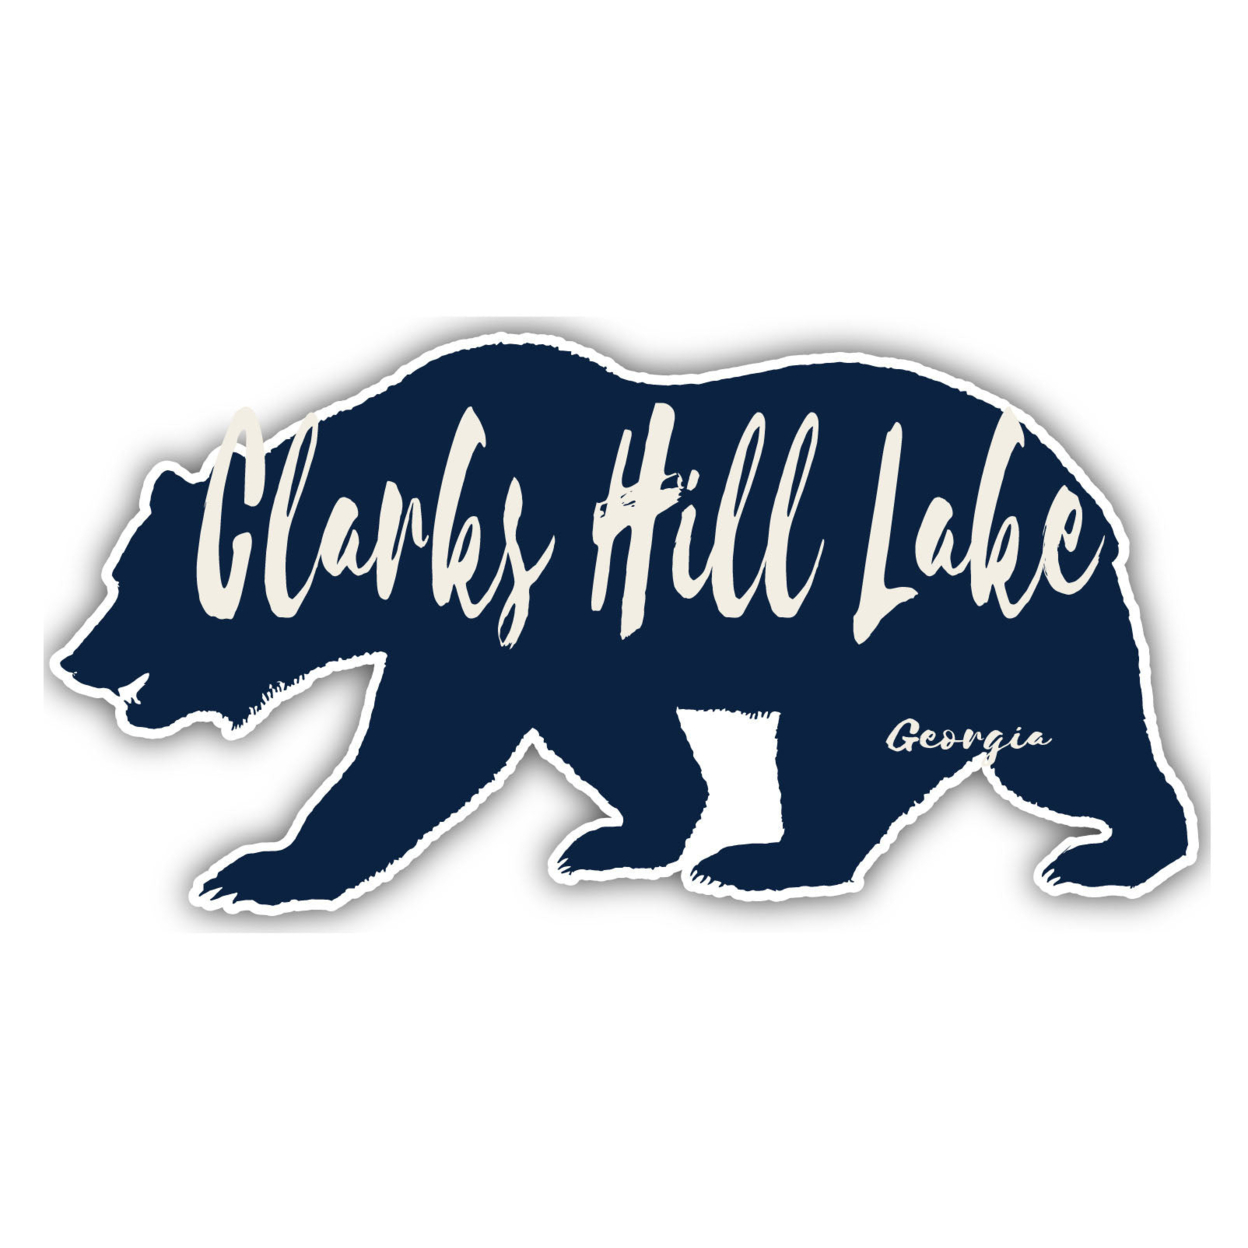 Clarks Hill Lake Georgia Souvenir Decorative Stickers (Choose Theme And Size) - 4-Pack, 12-Inch, Bear